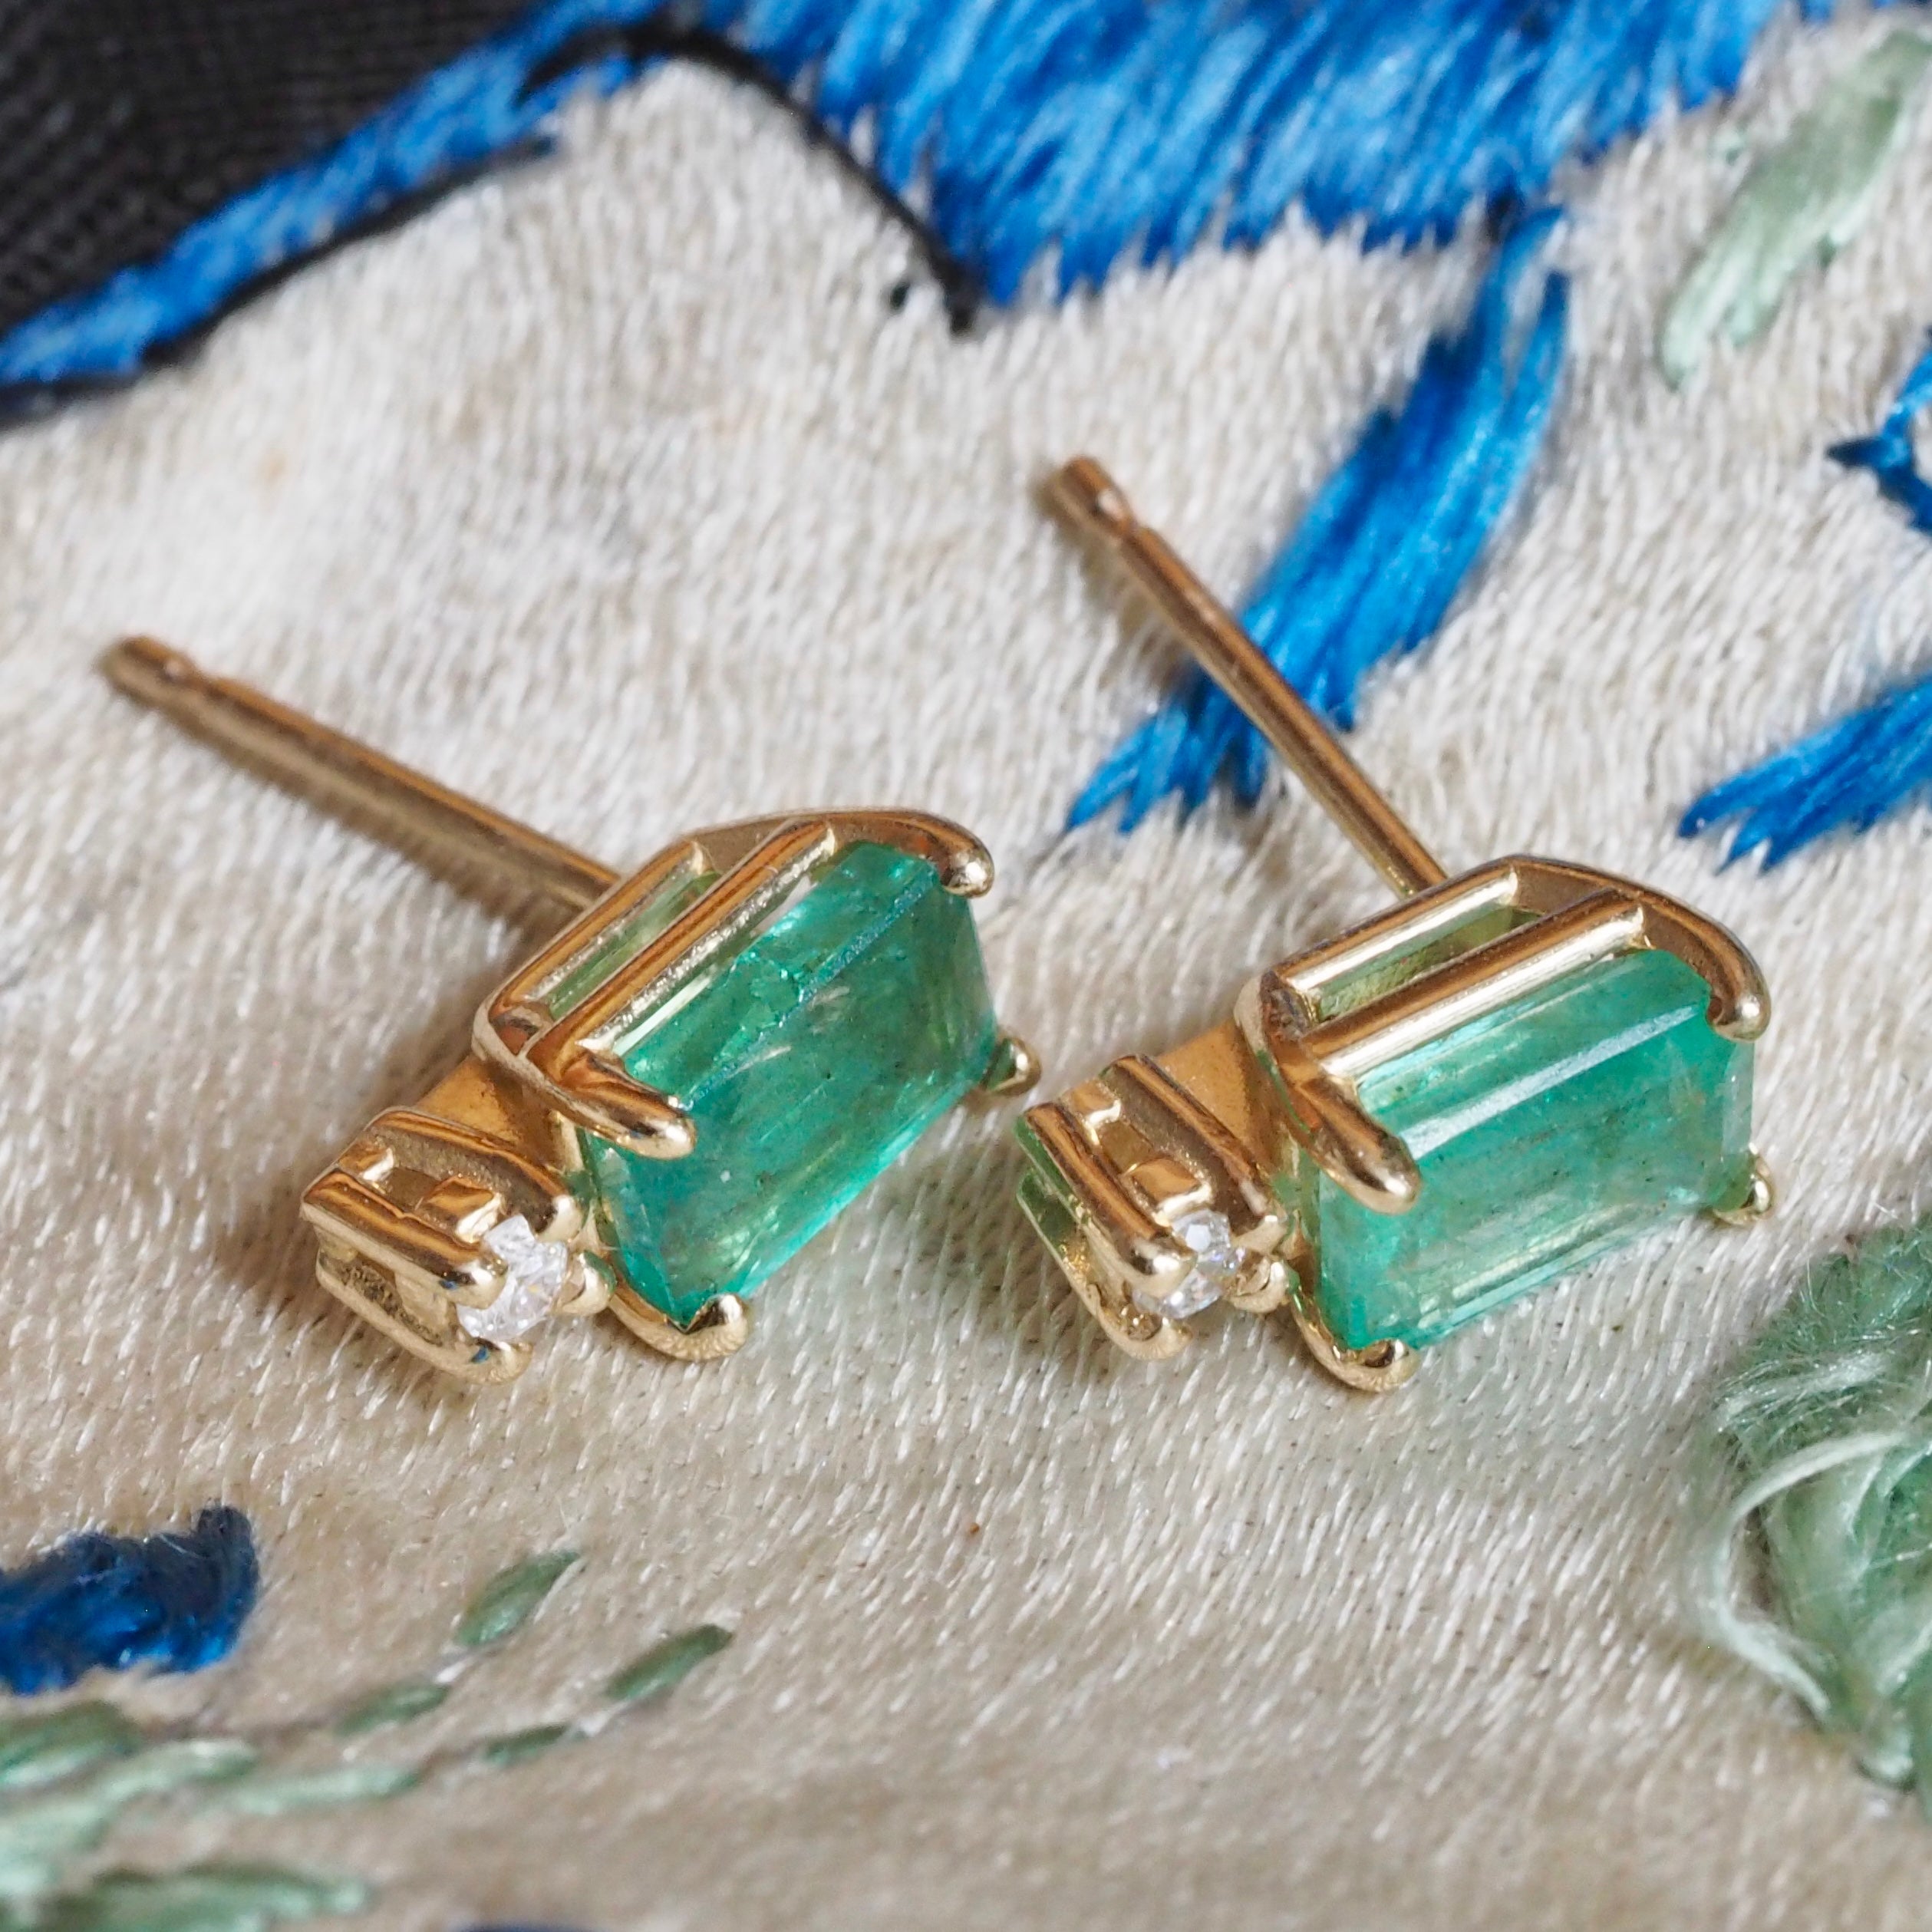 Vintage 14k Gold Emerald and Diamond Earrings